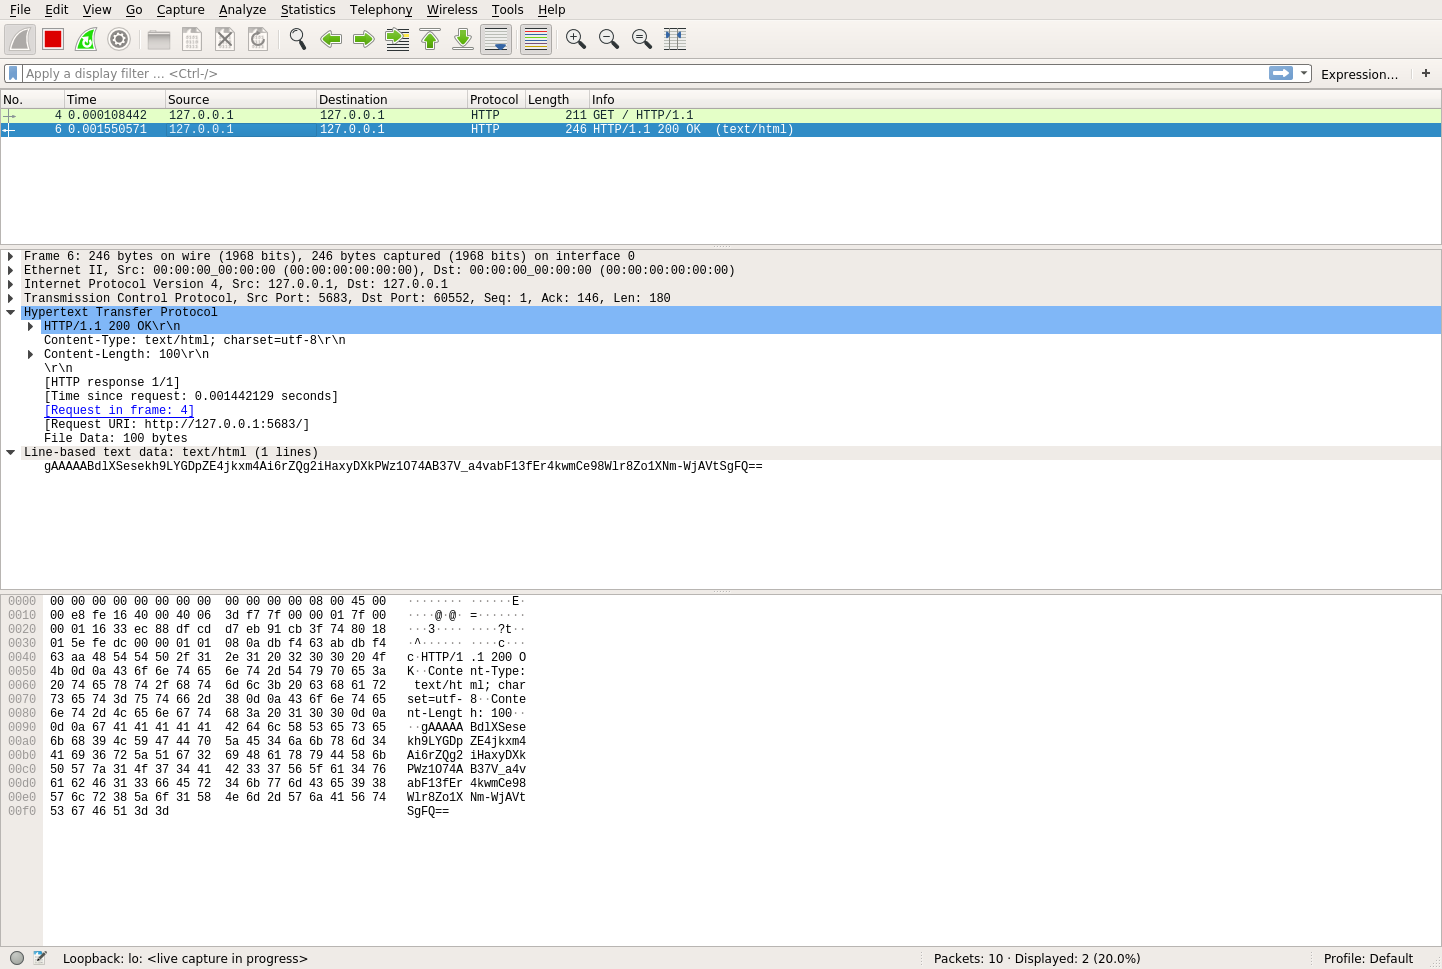 Wireshark's view of the HTTP response that was encrypted using symmetric encryption